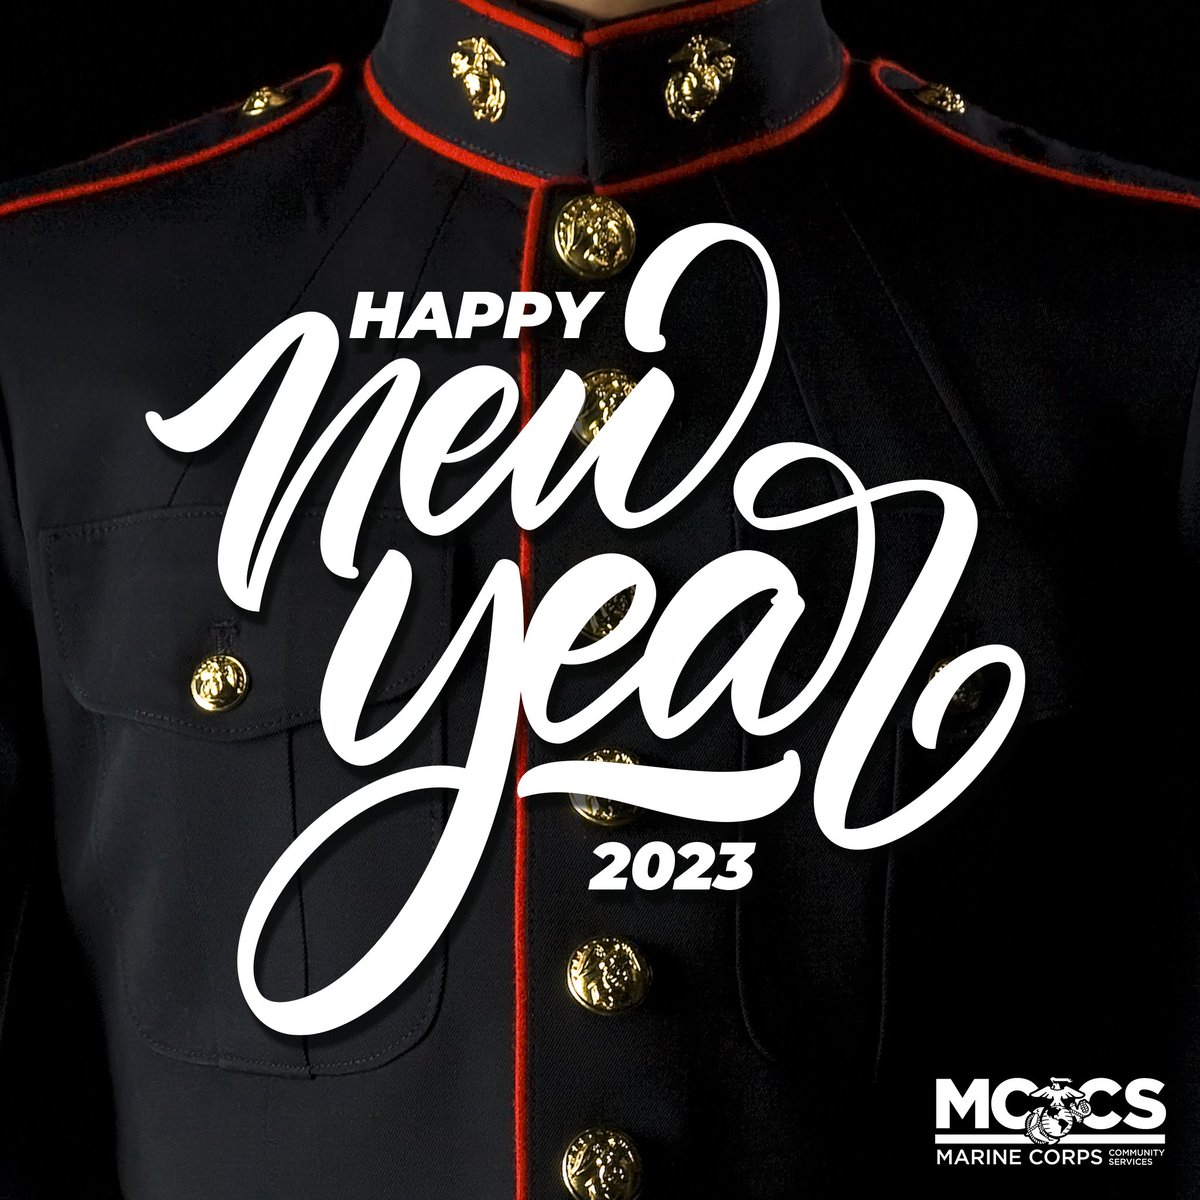 As we closeout one year and begin another, MCCS would like to wish all Marines and their families a healthy and safe 2023. #HappyNewYear #USMC #Marines